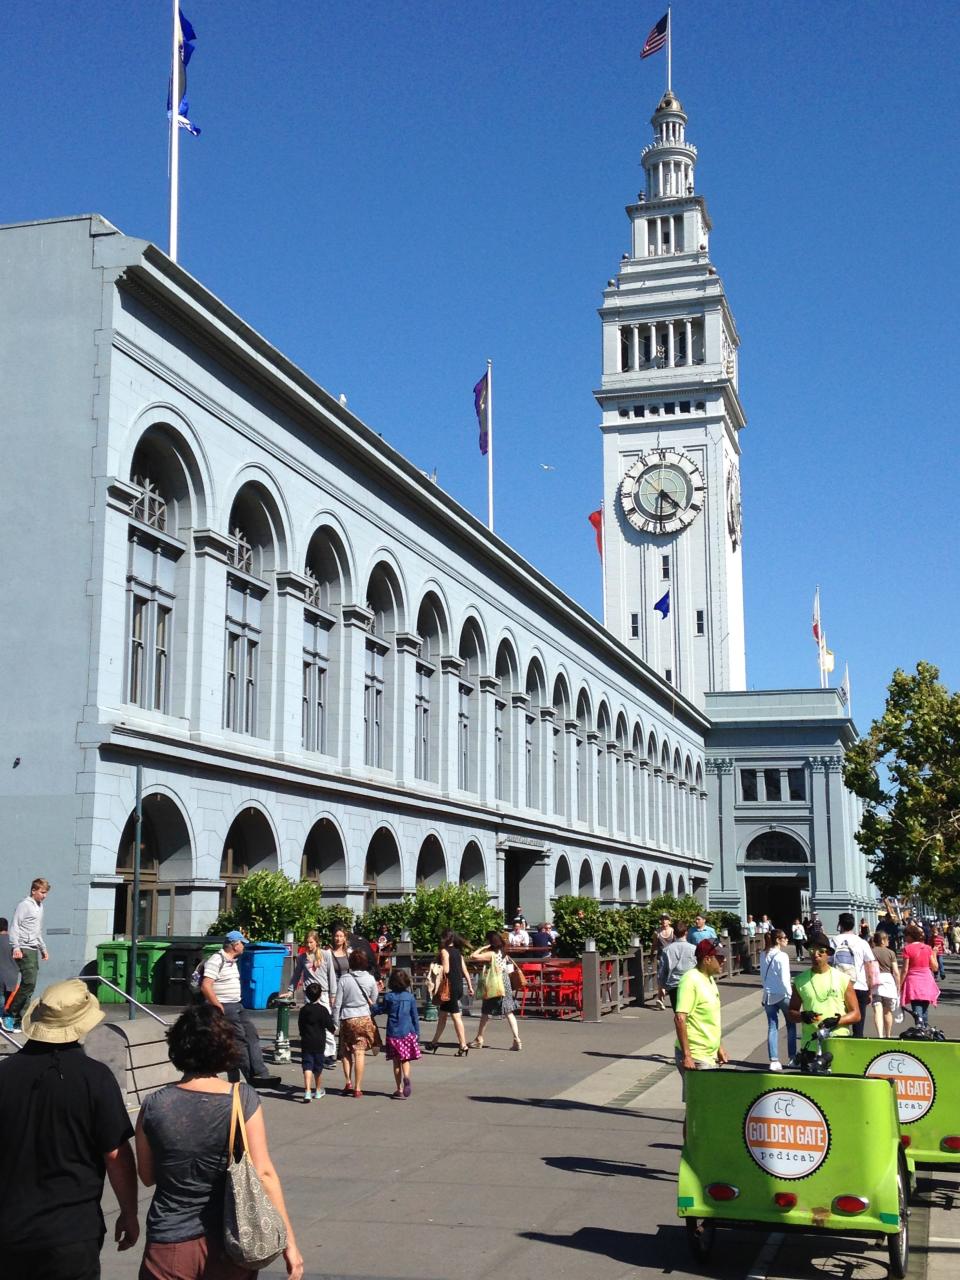 The ferry building was full of people in San Francisco.